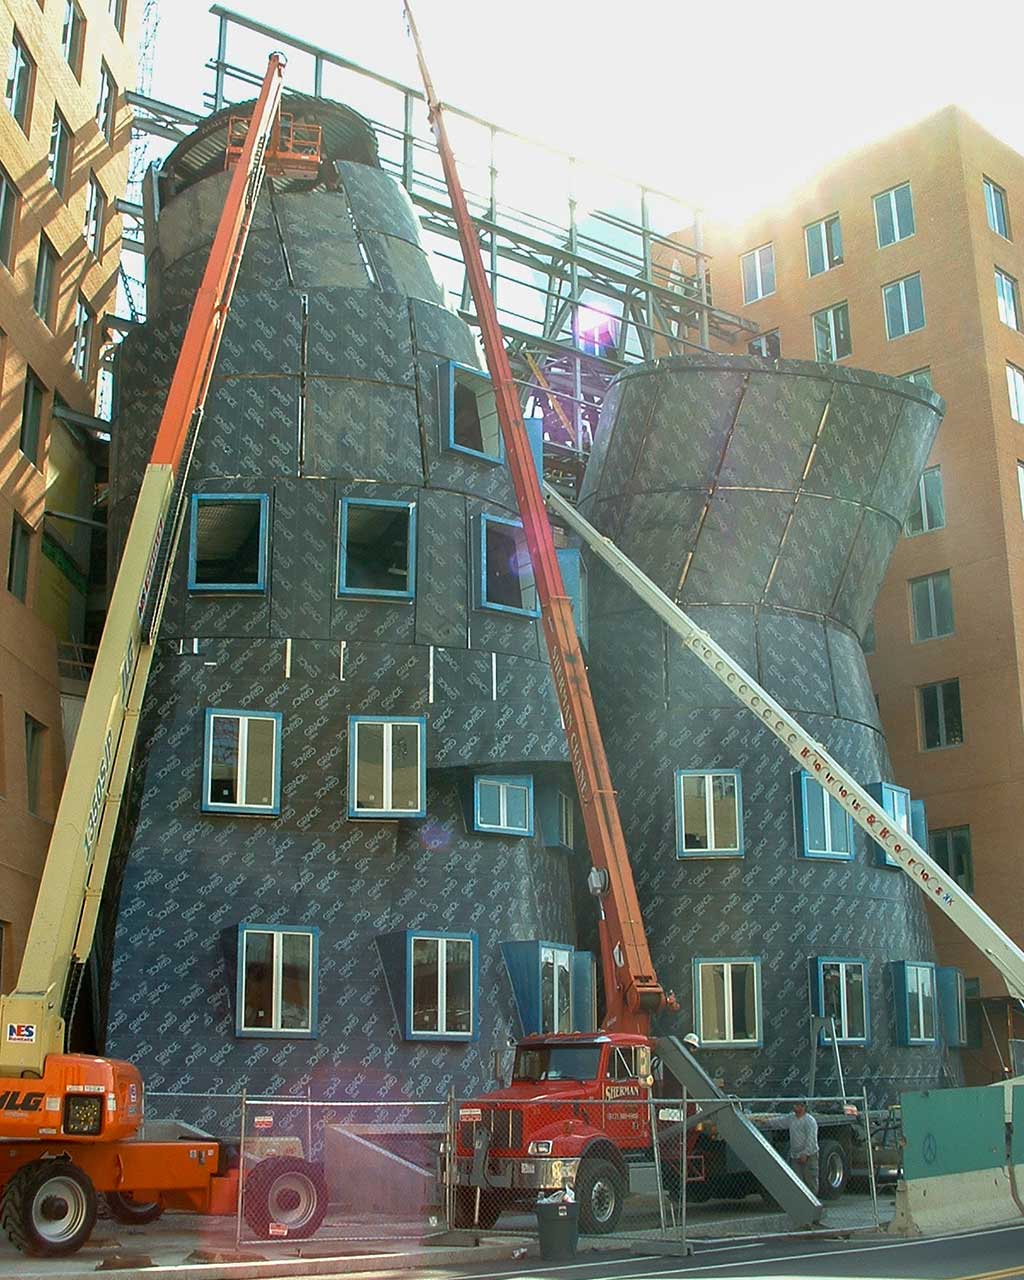 Twins building during construction revealing the ZEPPS panel understructure.